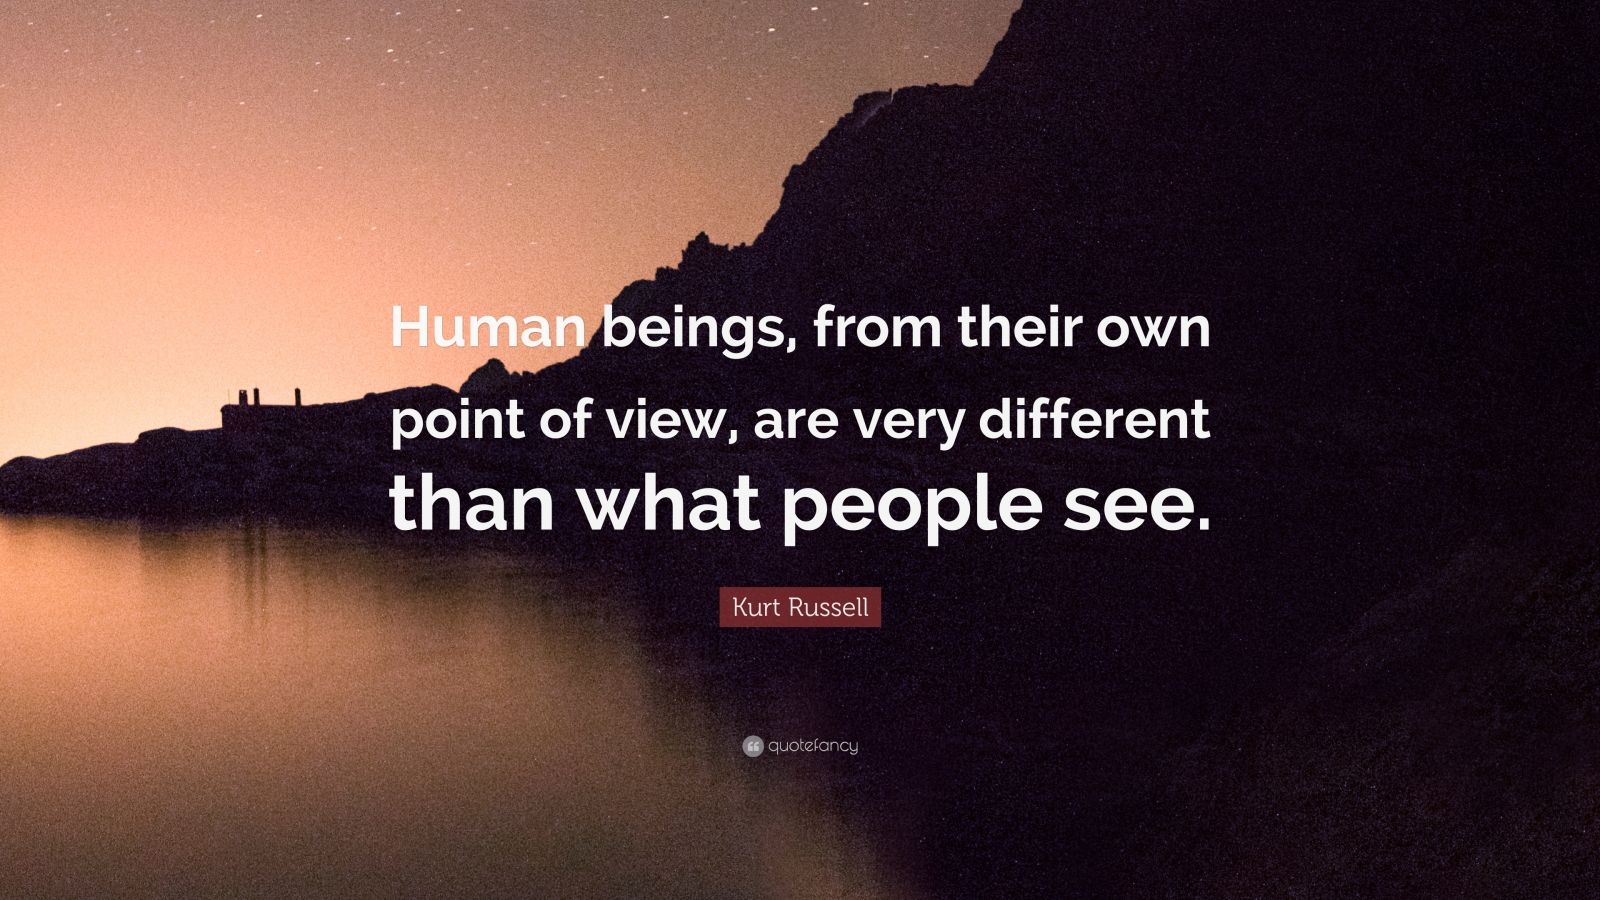 Kurt Russell Quote: “Human beings, from their own point of view, are ...